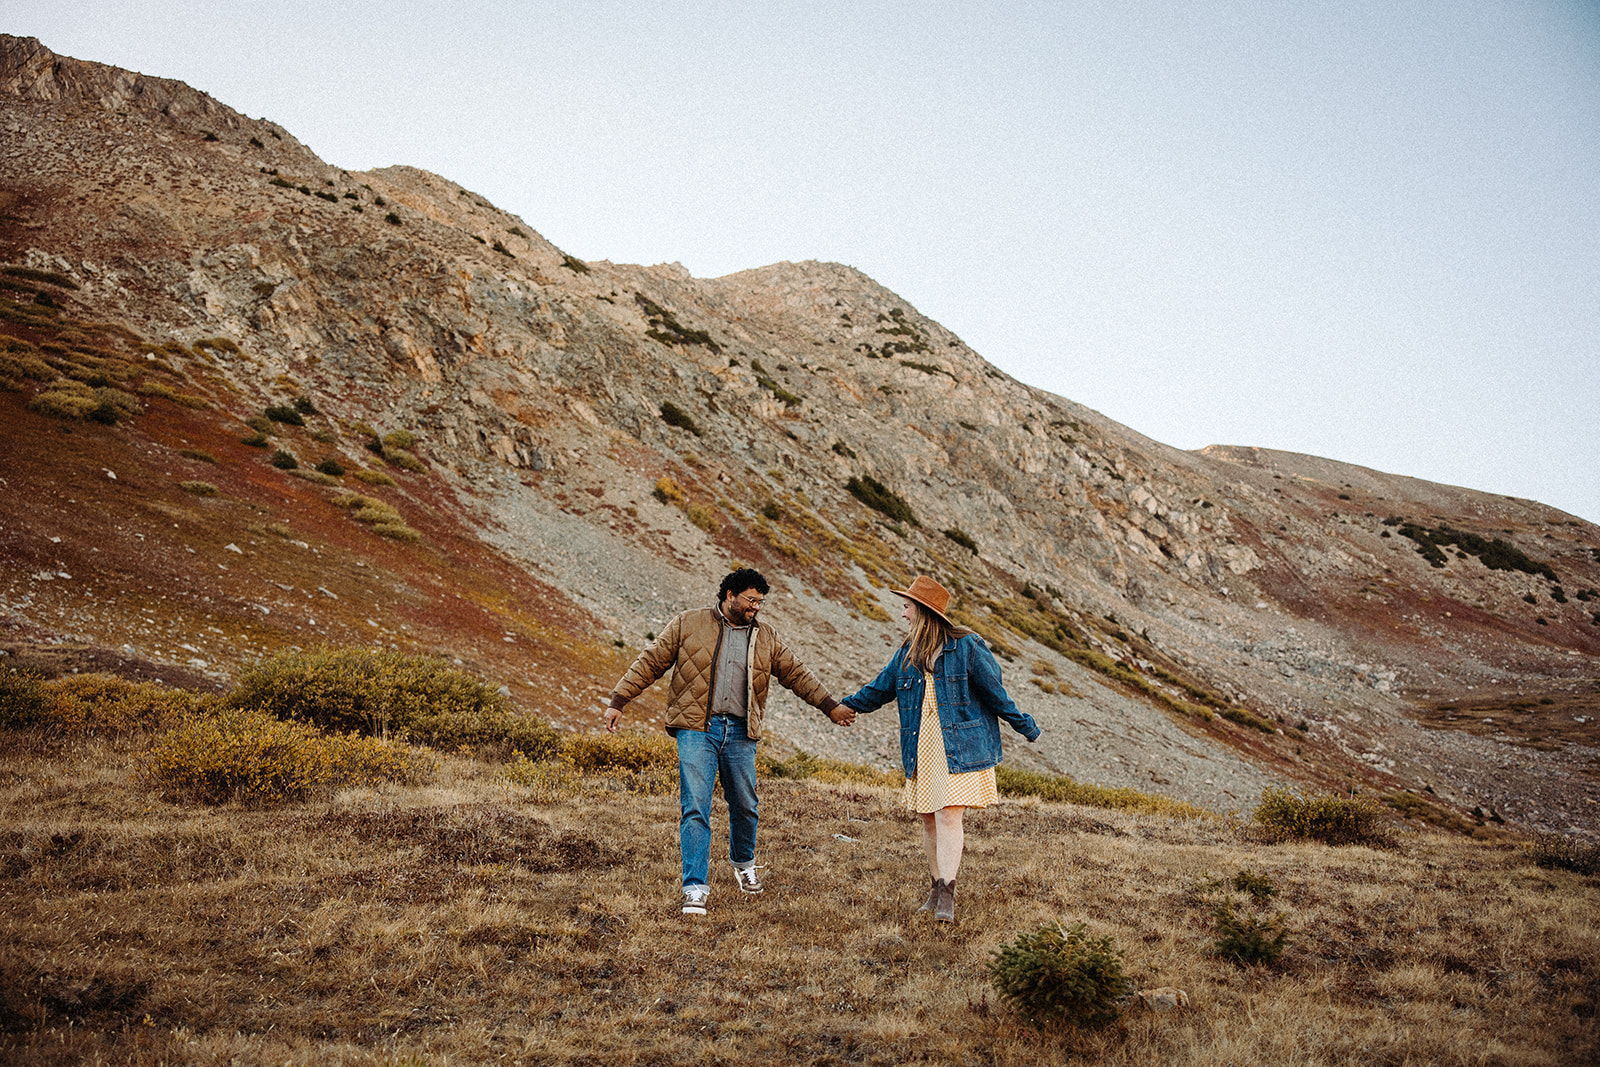 Man and his fiance holding hands as they walk through a grassy meadow along the rusty hills.